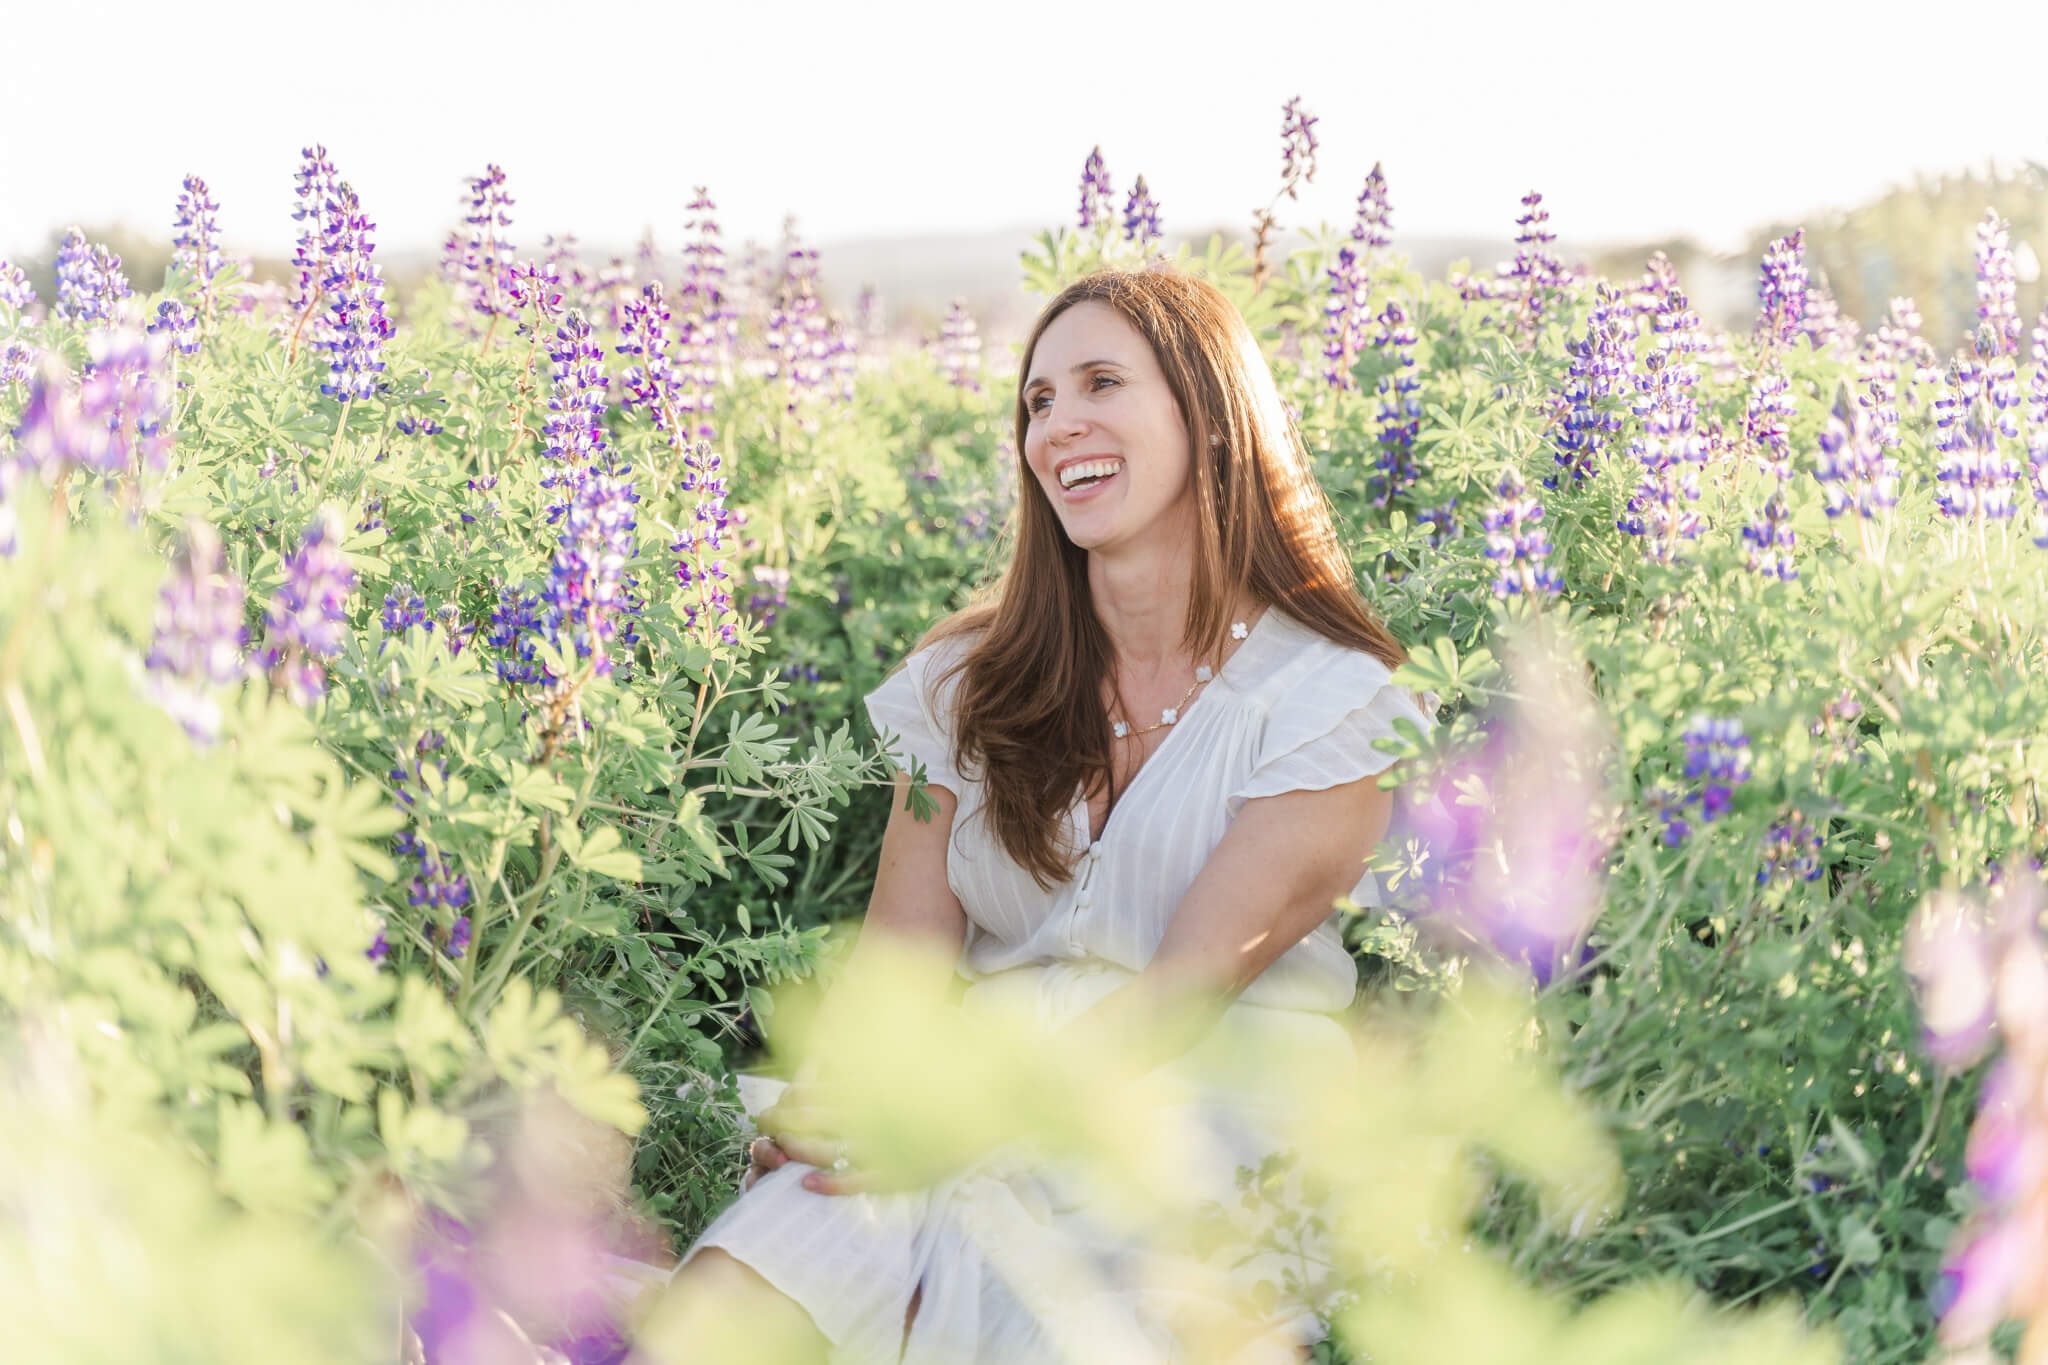 Brunette woman in white dress sitting in a green field of purple lupin flowers and laughing- Kindbody Newport Beach